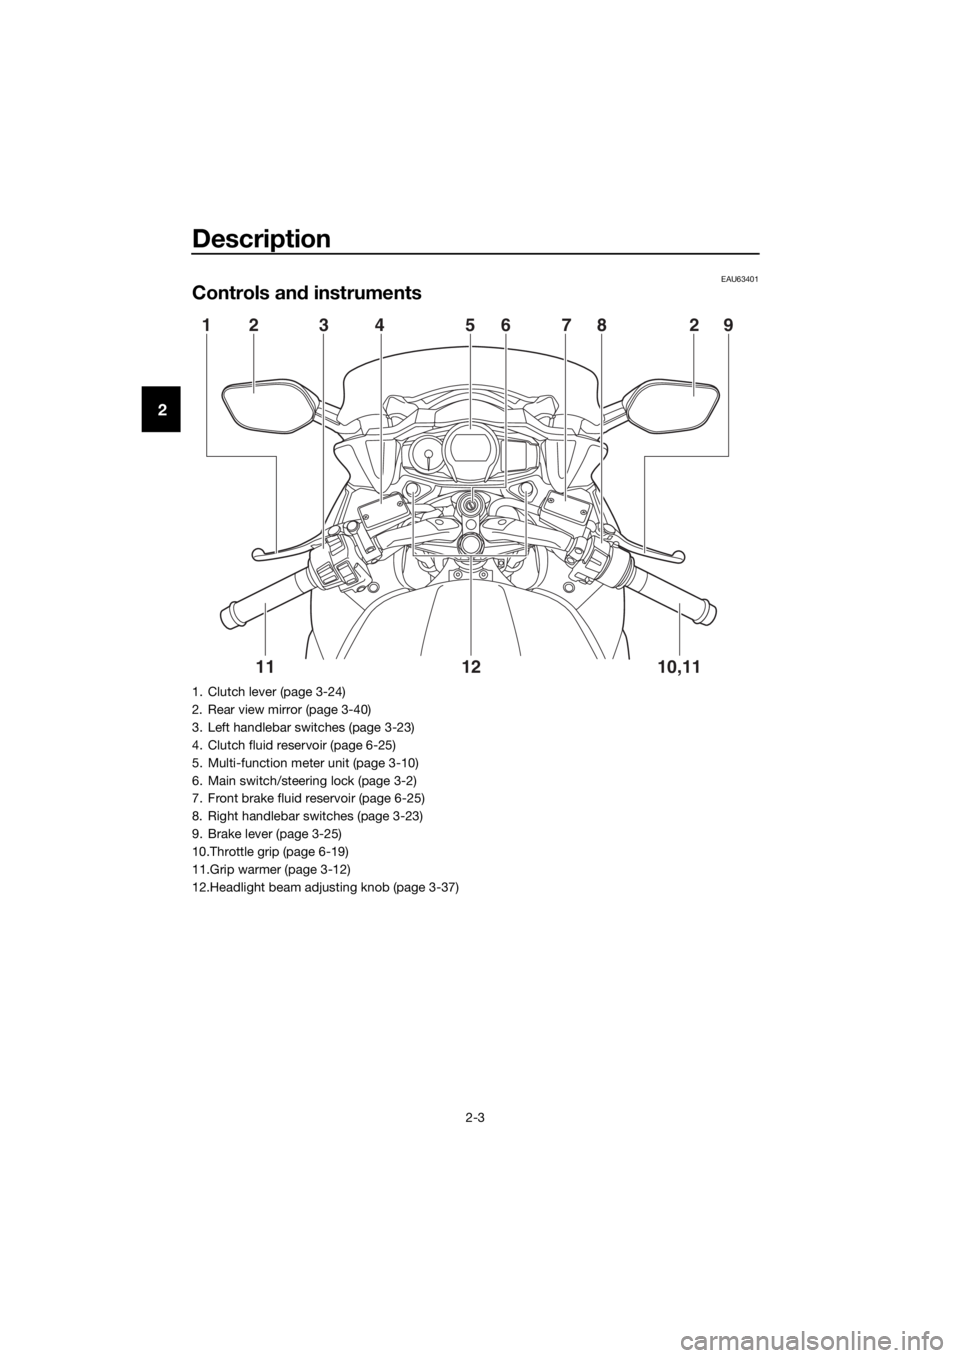 YAMAHA FJR1300AE 2016  Owners Manual Description
2-3
2
EAU63401
Controls and instruments
12 3 4 5678 29
10,11
12
11
1. Clutch lever (page 3-24)
2. Rear view mirror (page 3-40)
3. Left handlebar switches (page 3-23)
4. Clutch fluid reserv